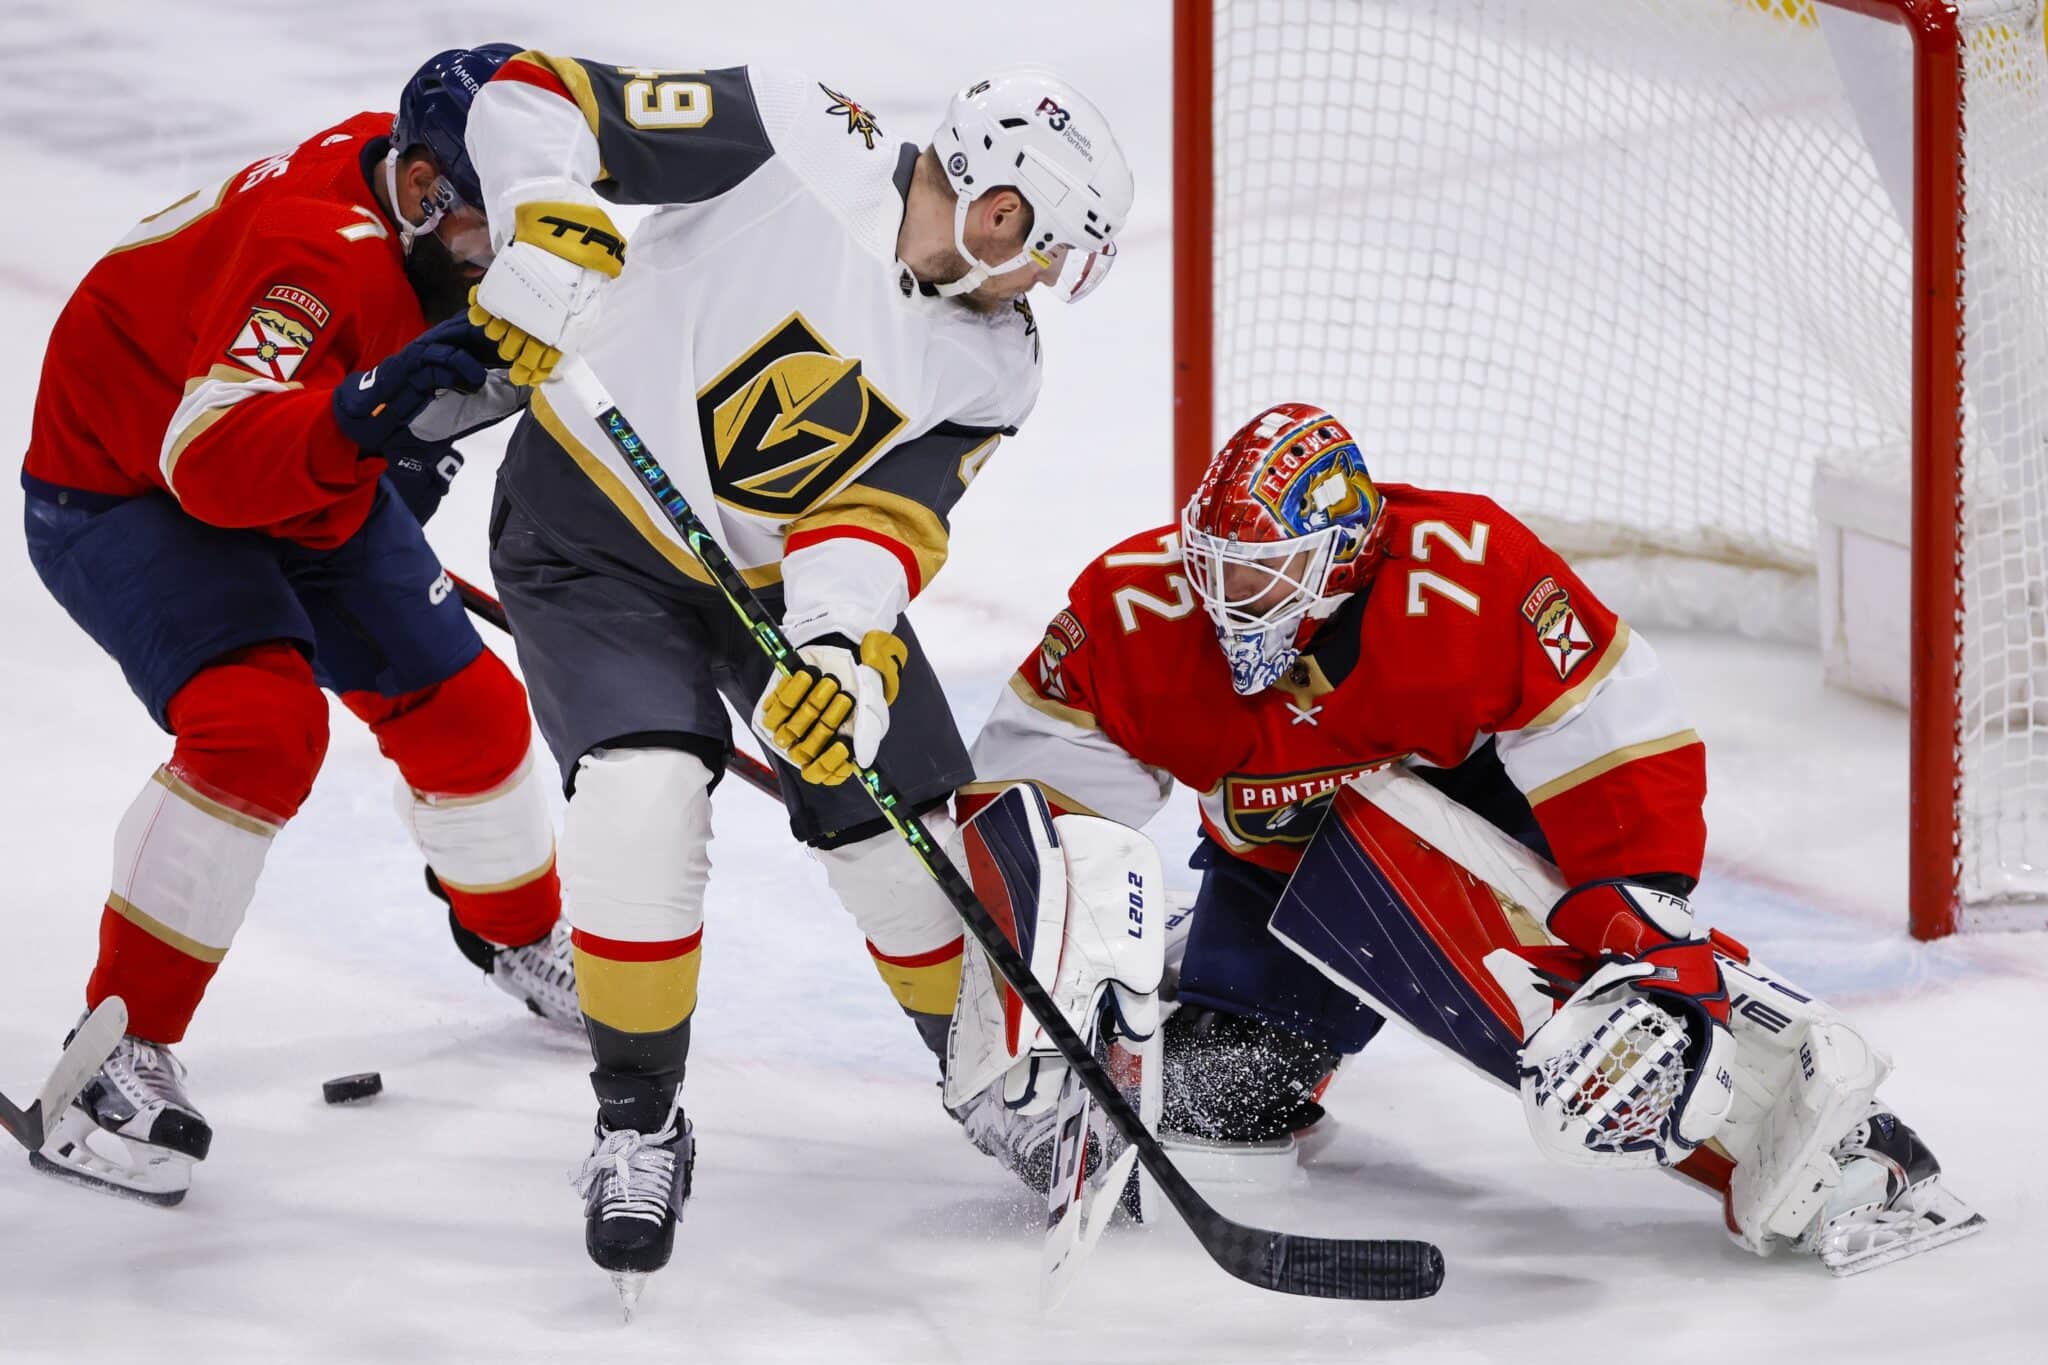 Stanley Cup Finals: Panthers vs. Golden Knights is a Matchup of Traditional NHL Powers